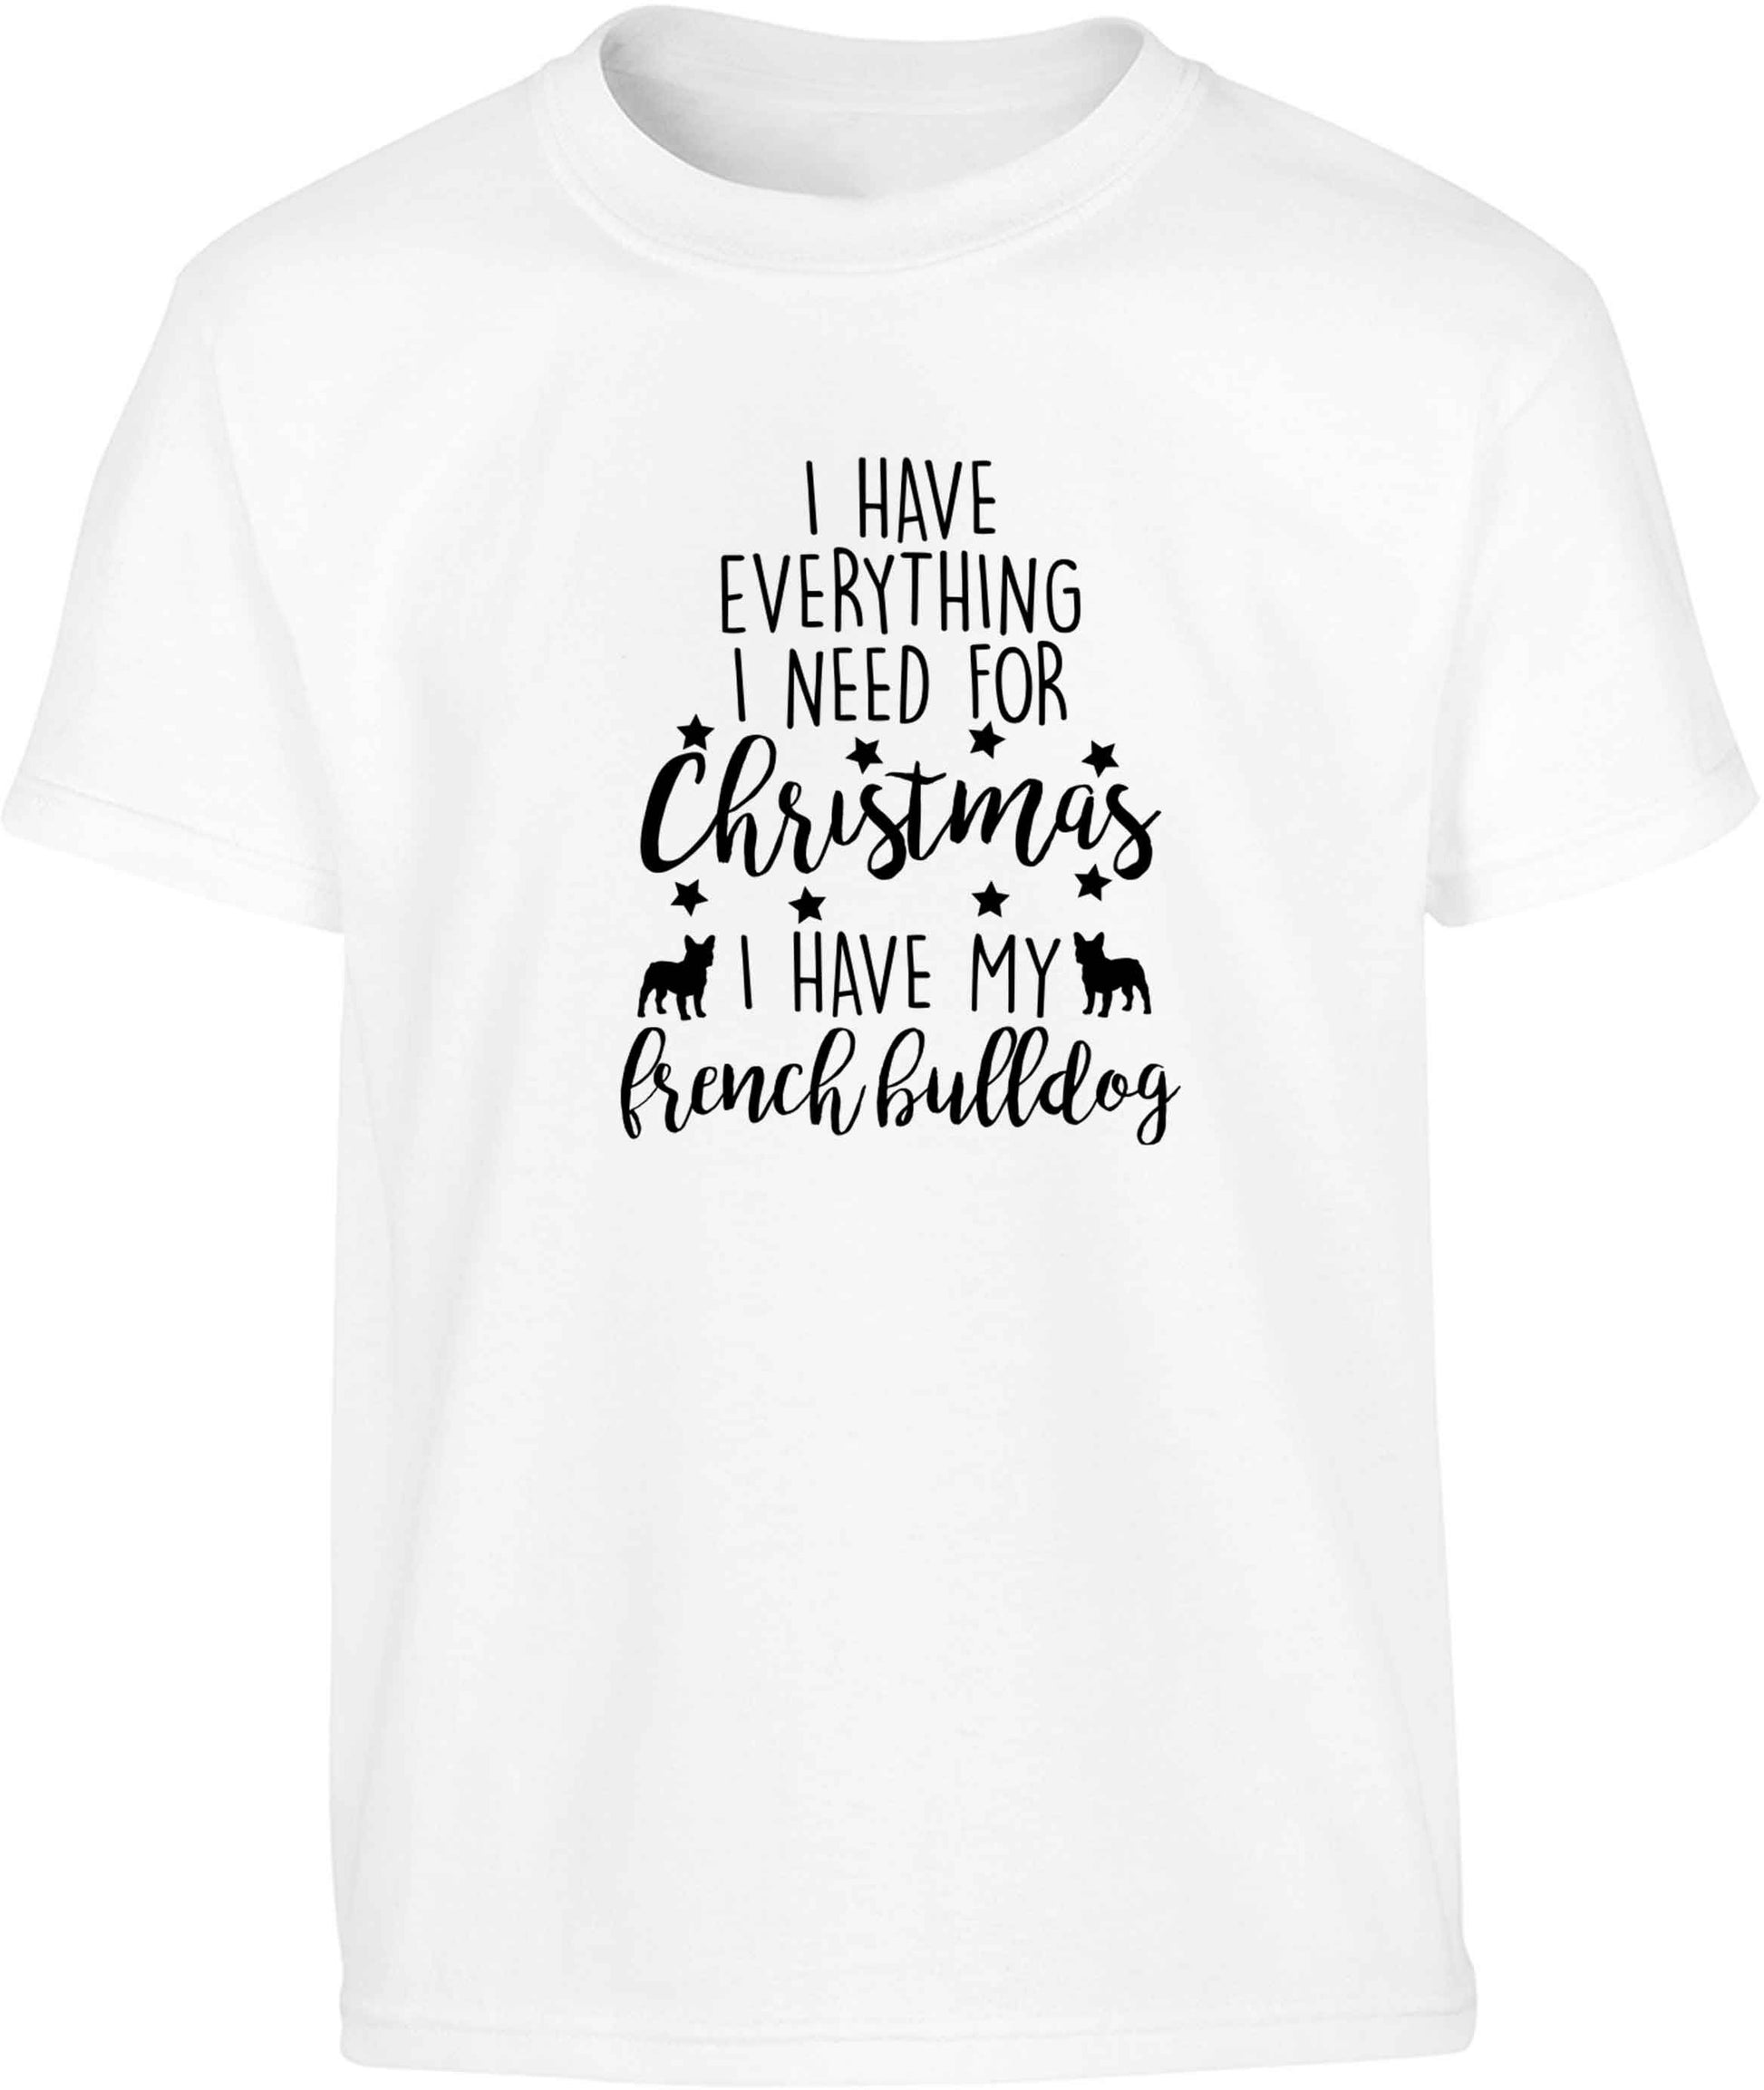 I have everything I need for Christmas I have my french bulldog Children's white Tshirt 12-13 Years